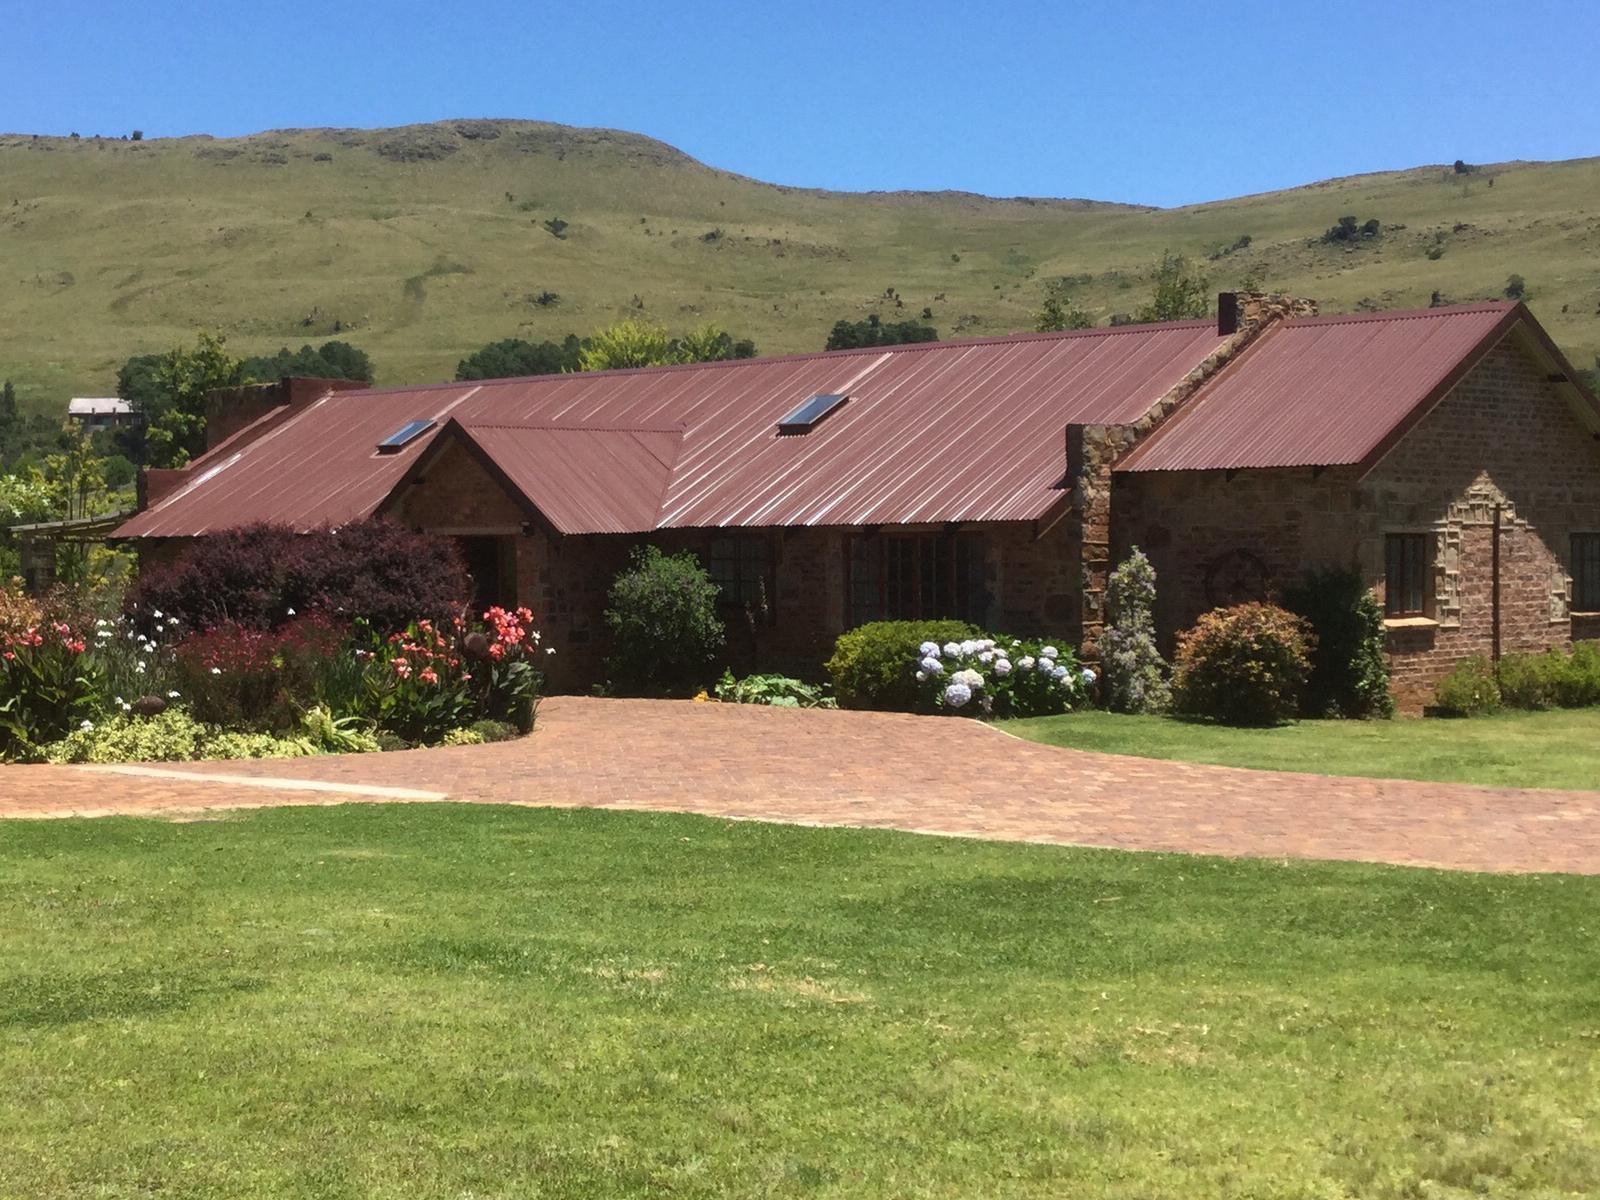 Willow Weir Cottage Dullstroom Mpumalanga South Africa House, Building, Architecture, Highland, Nature